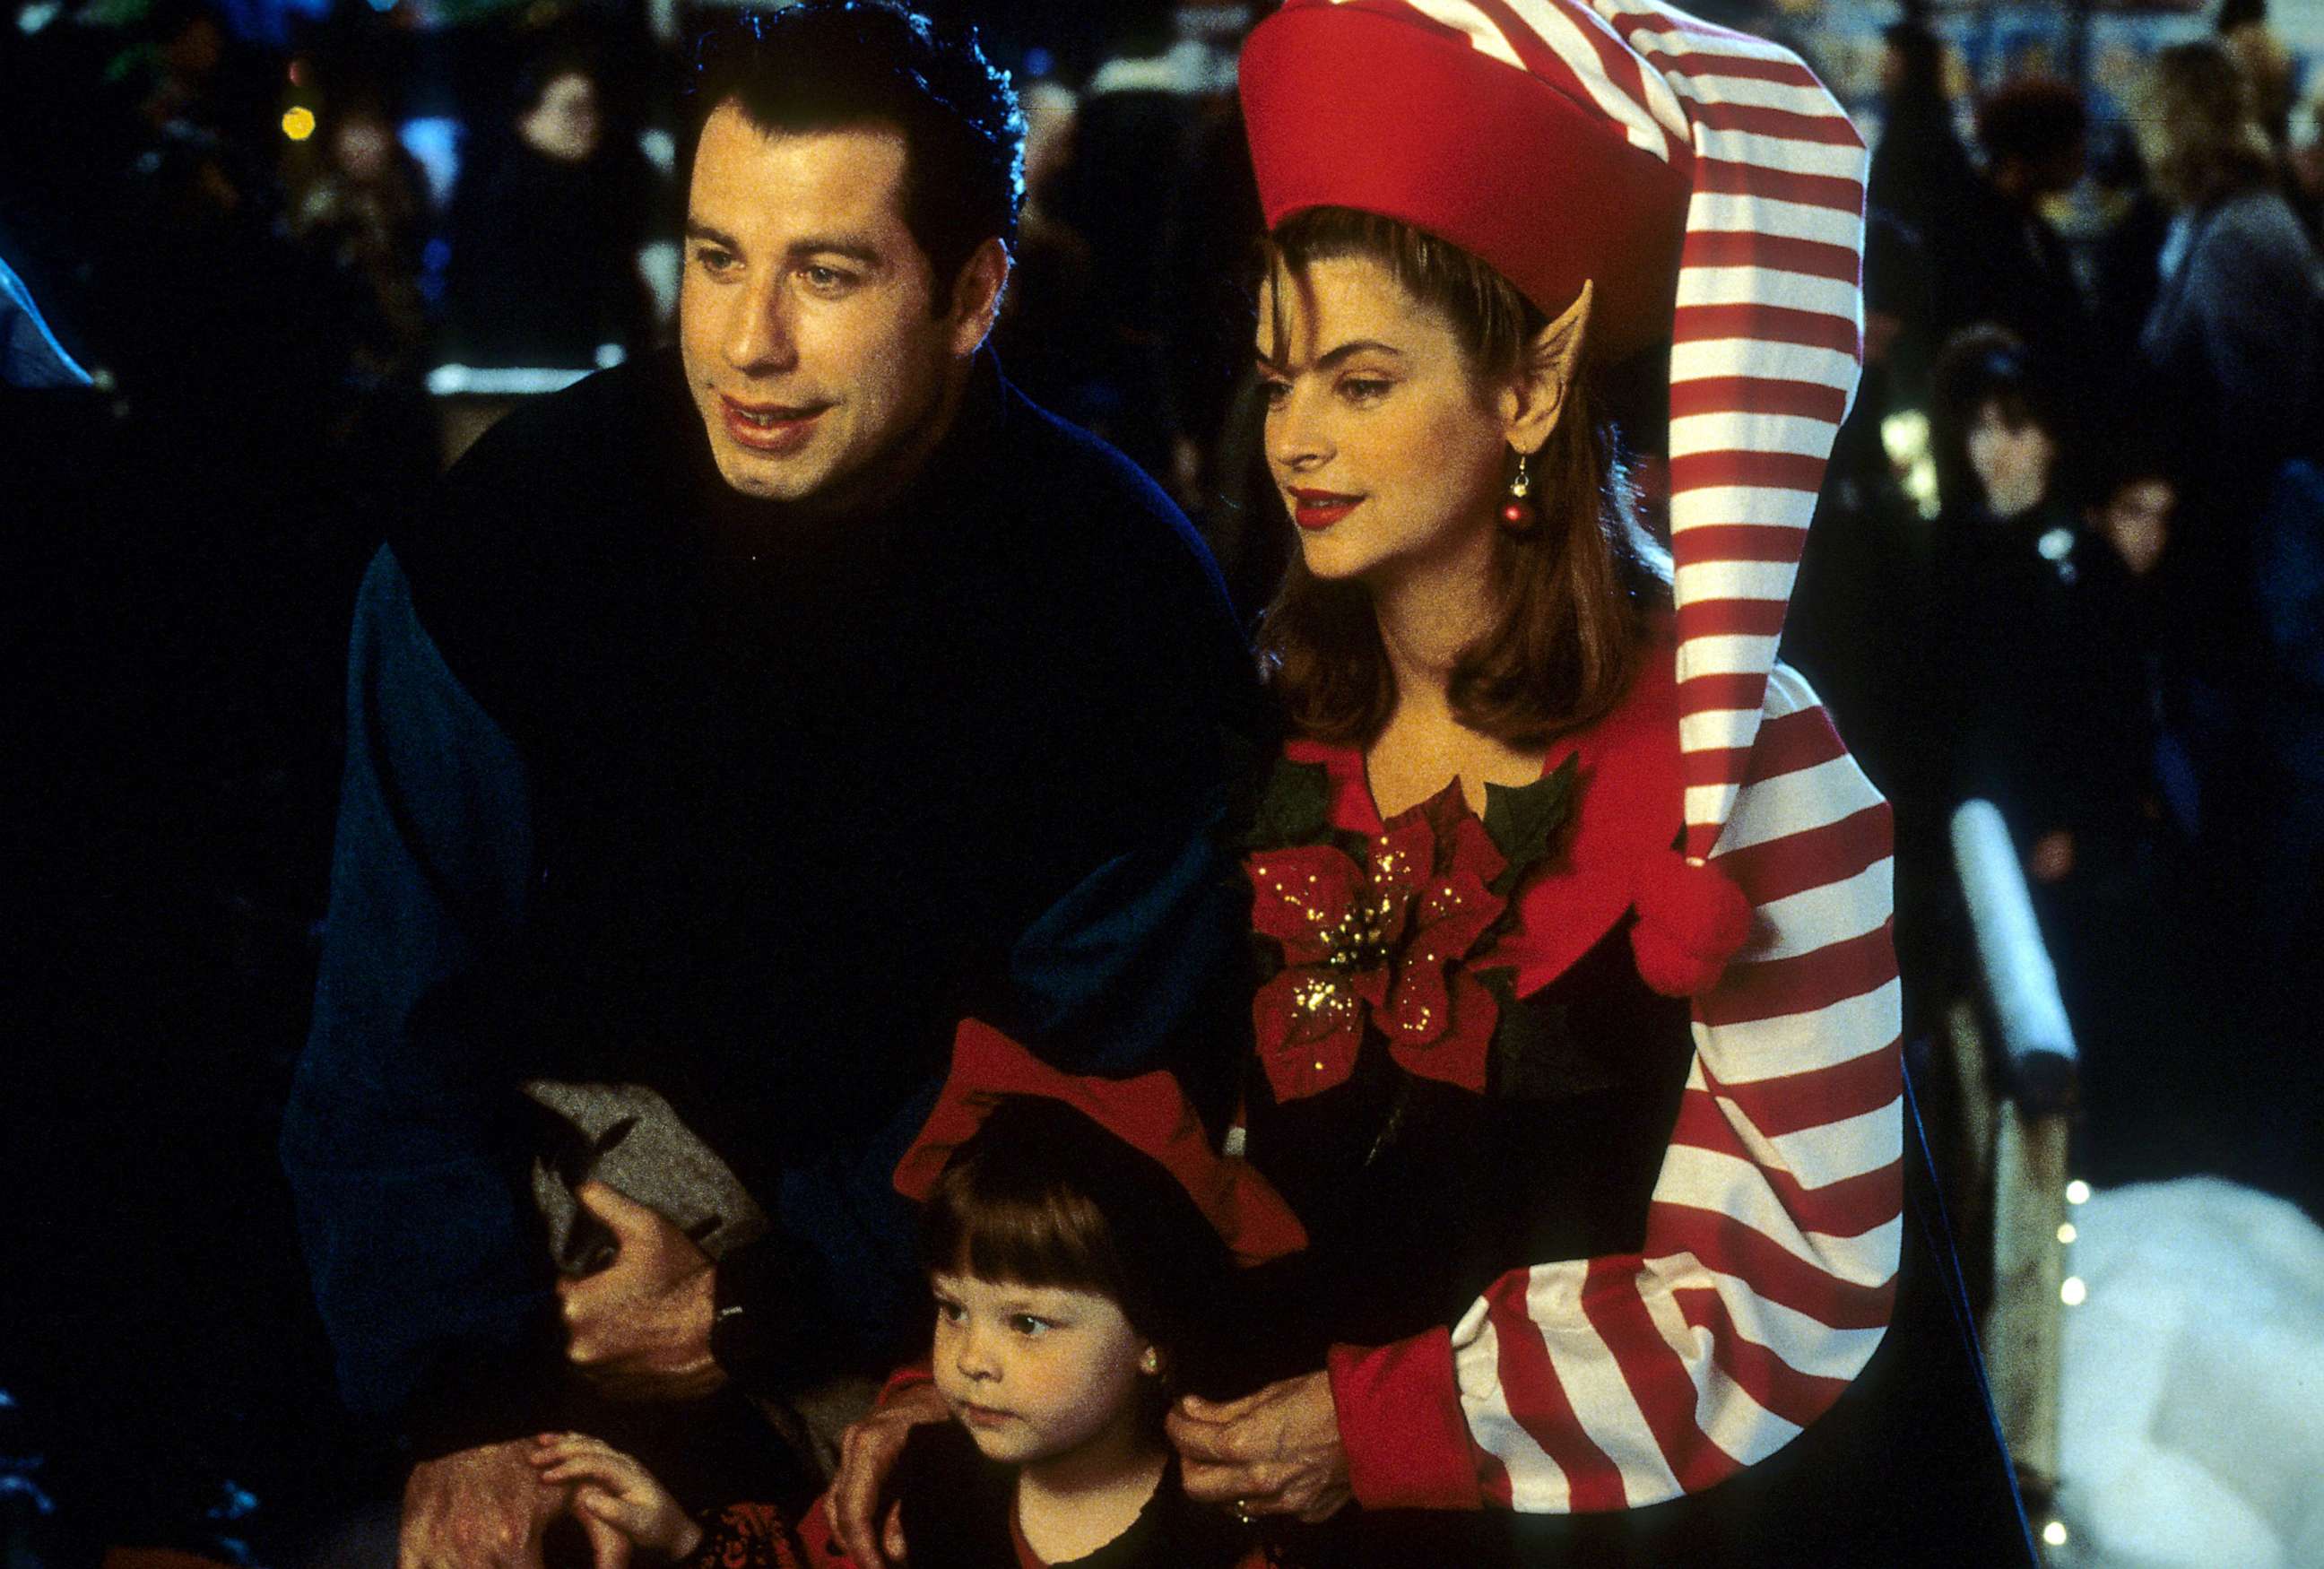 PHOTO: John Travolta and Kirstie Alley in a scene from the film "Look Who's Talking," 1989.